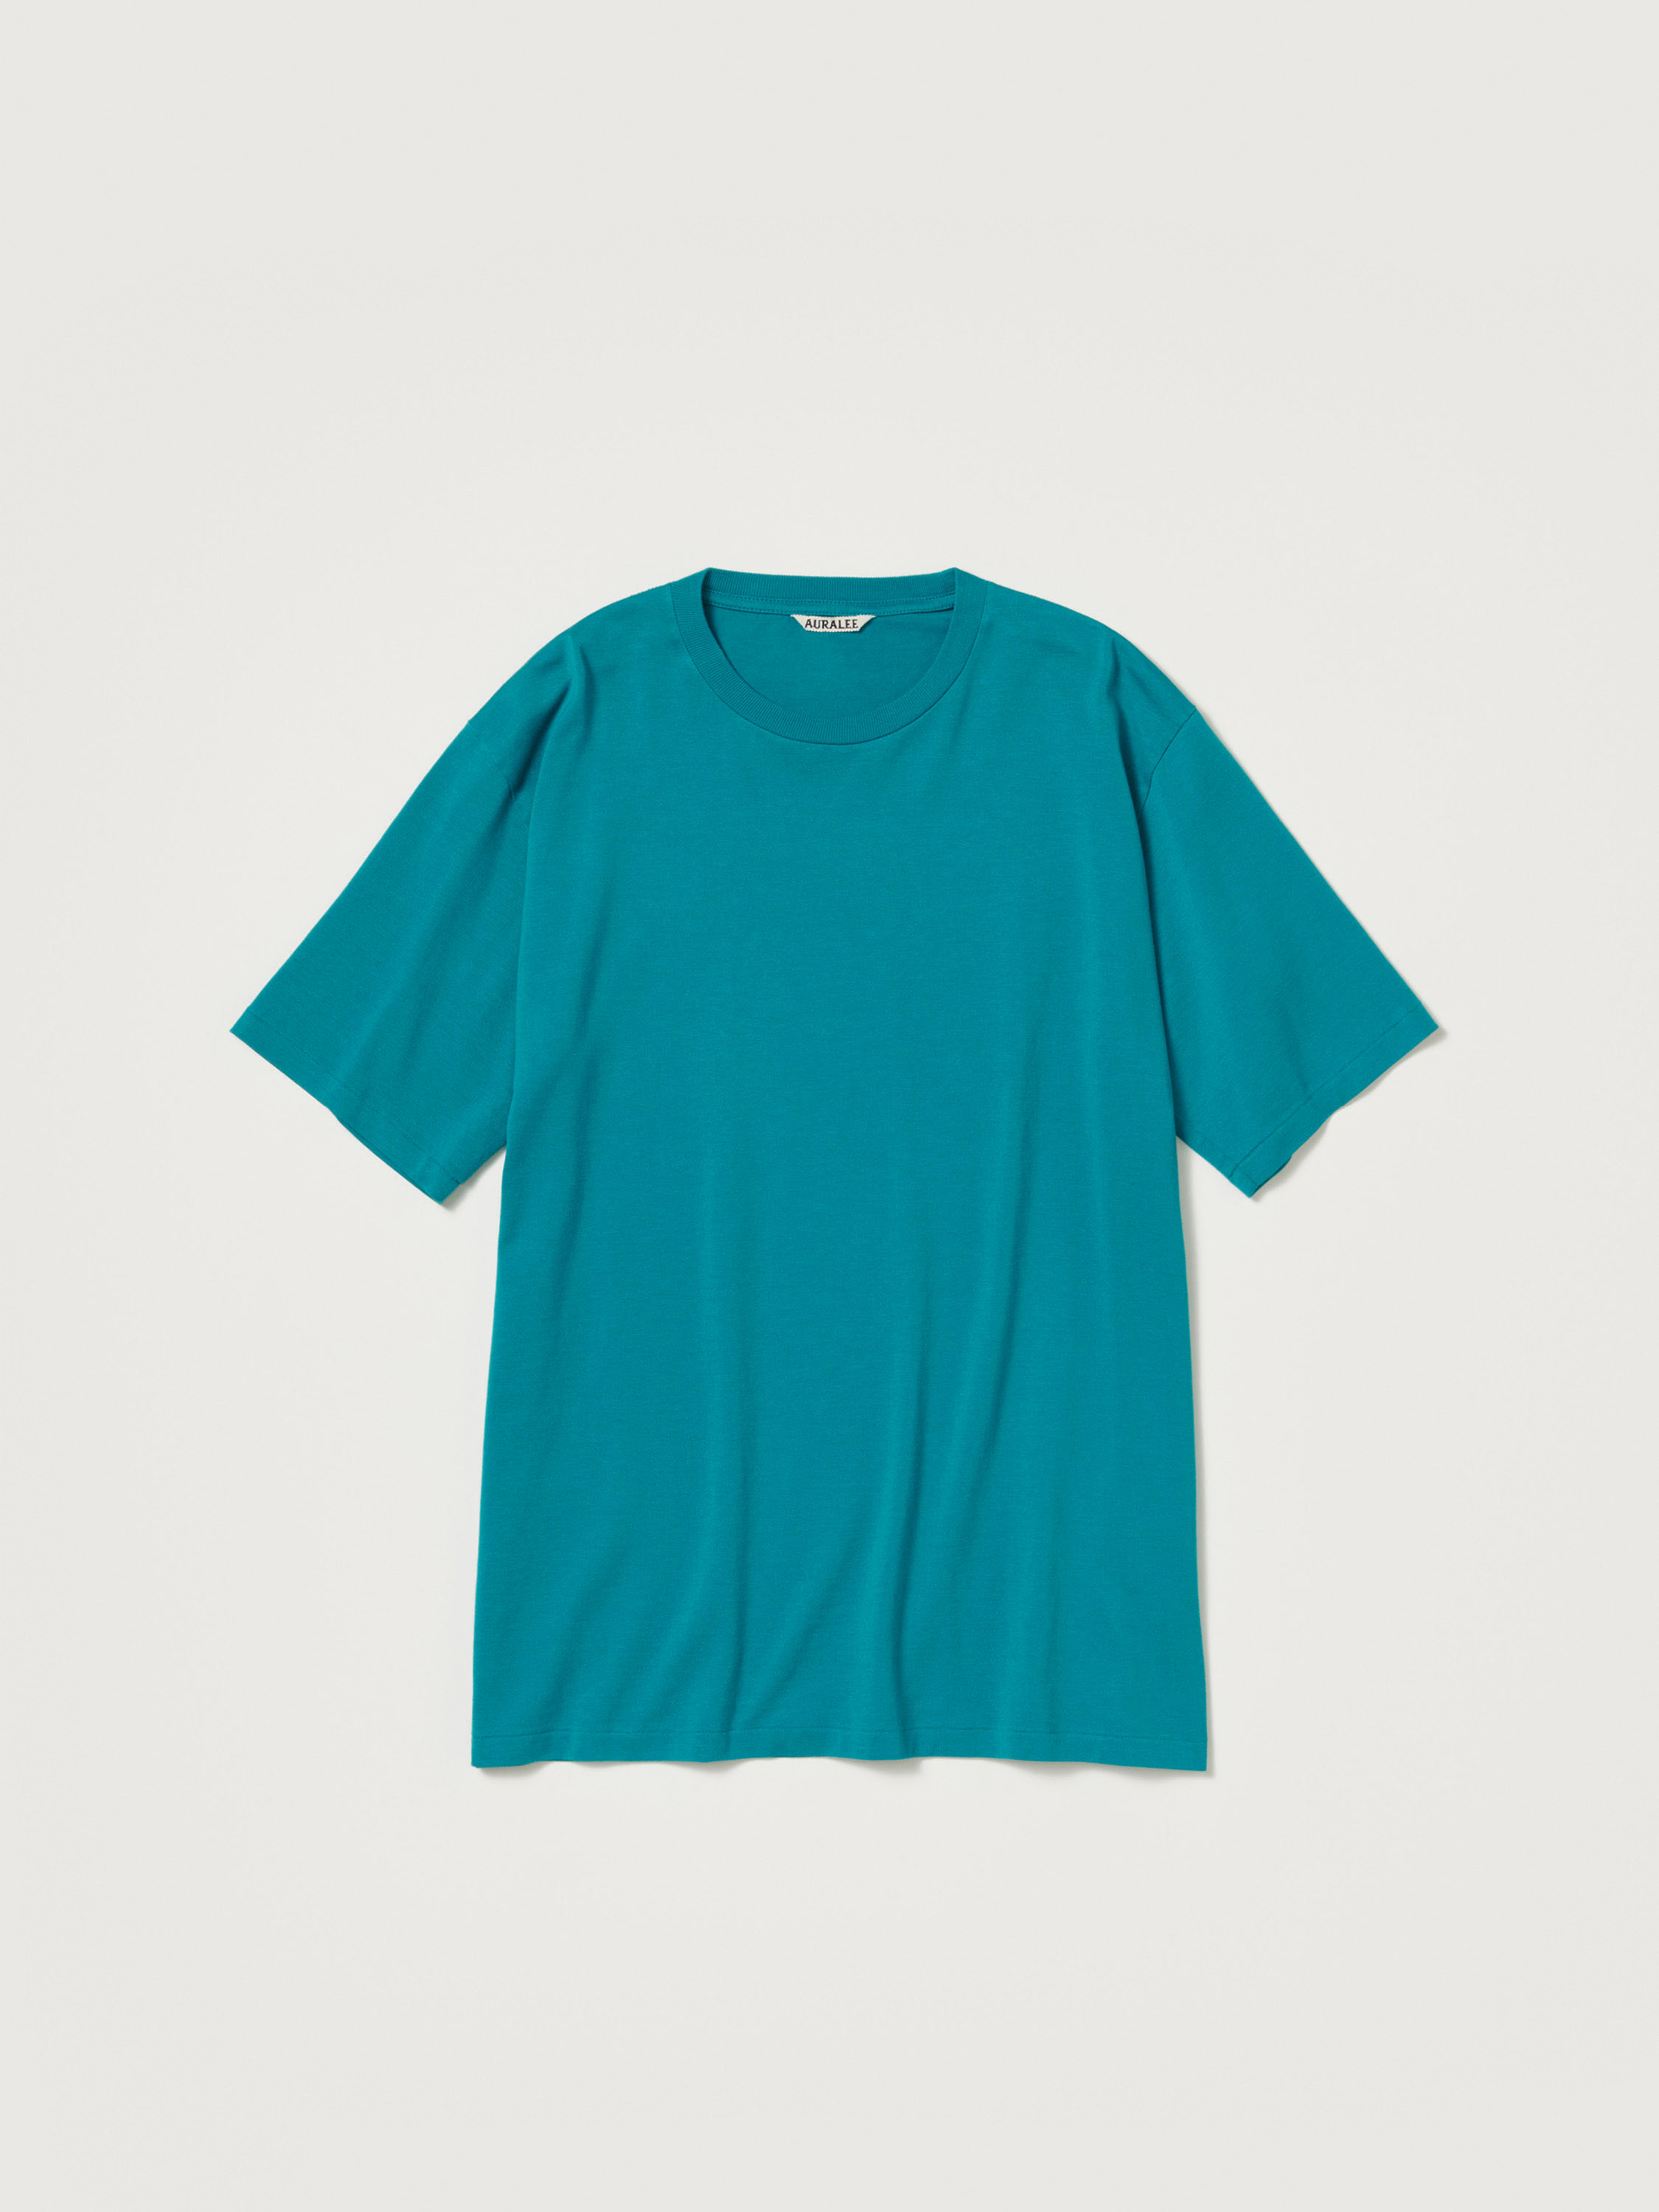 LUSTER PLAITING TEE 詳細画像 TEAL GREEN 1